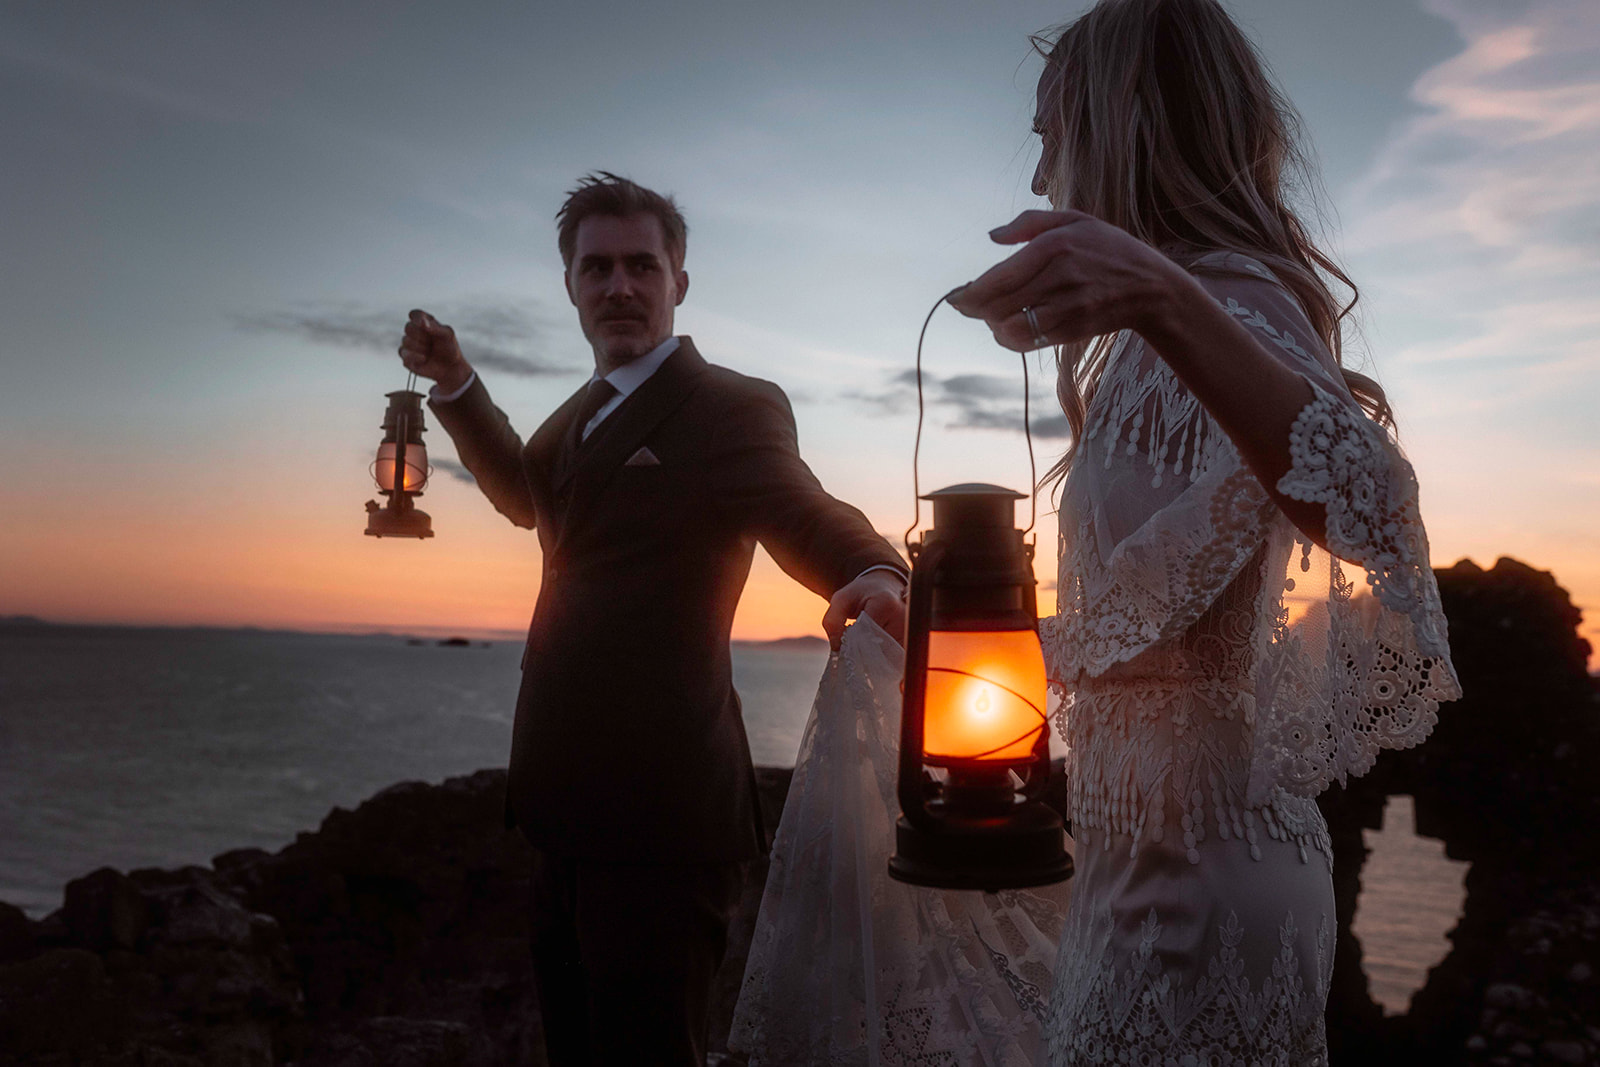 With their lanterns, Kara and Andy stroll around the breathtaking Isle of Skye.